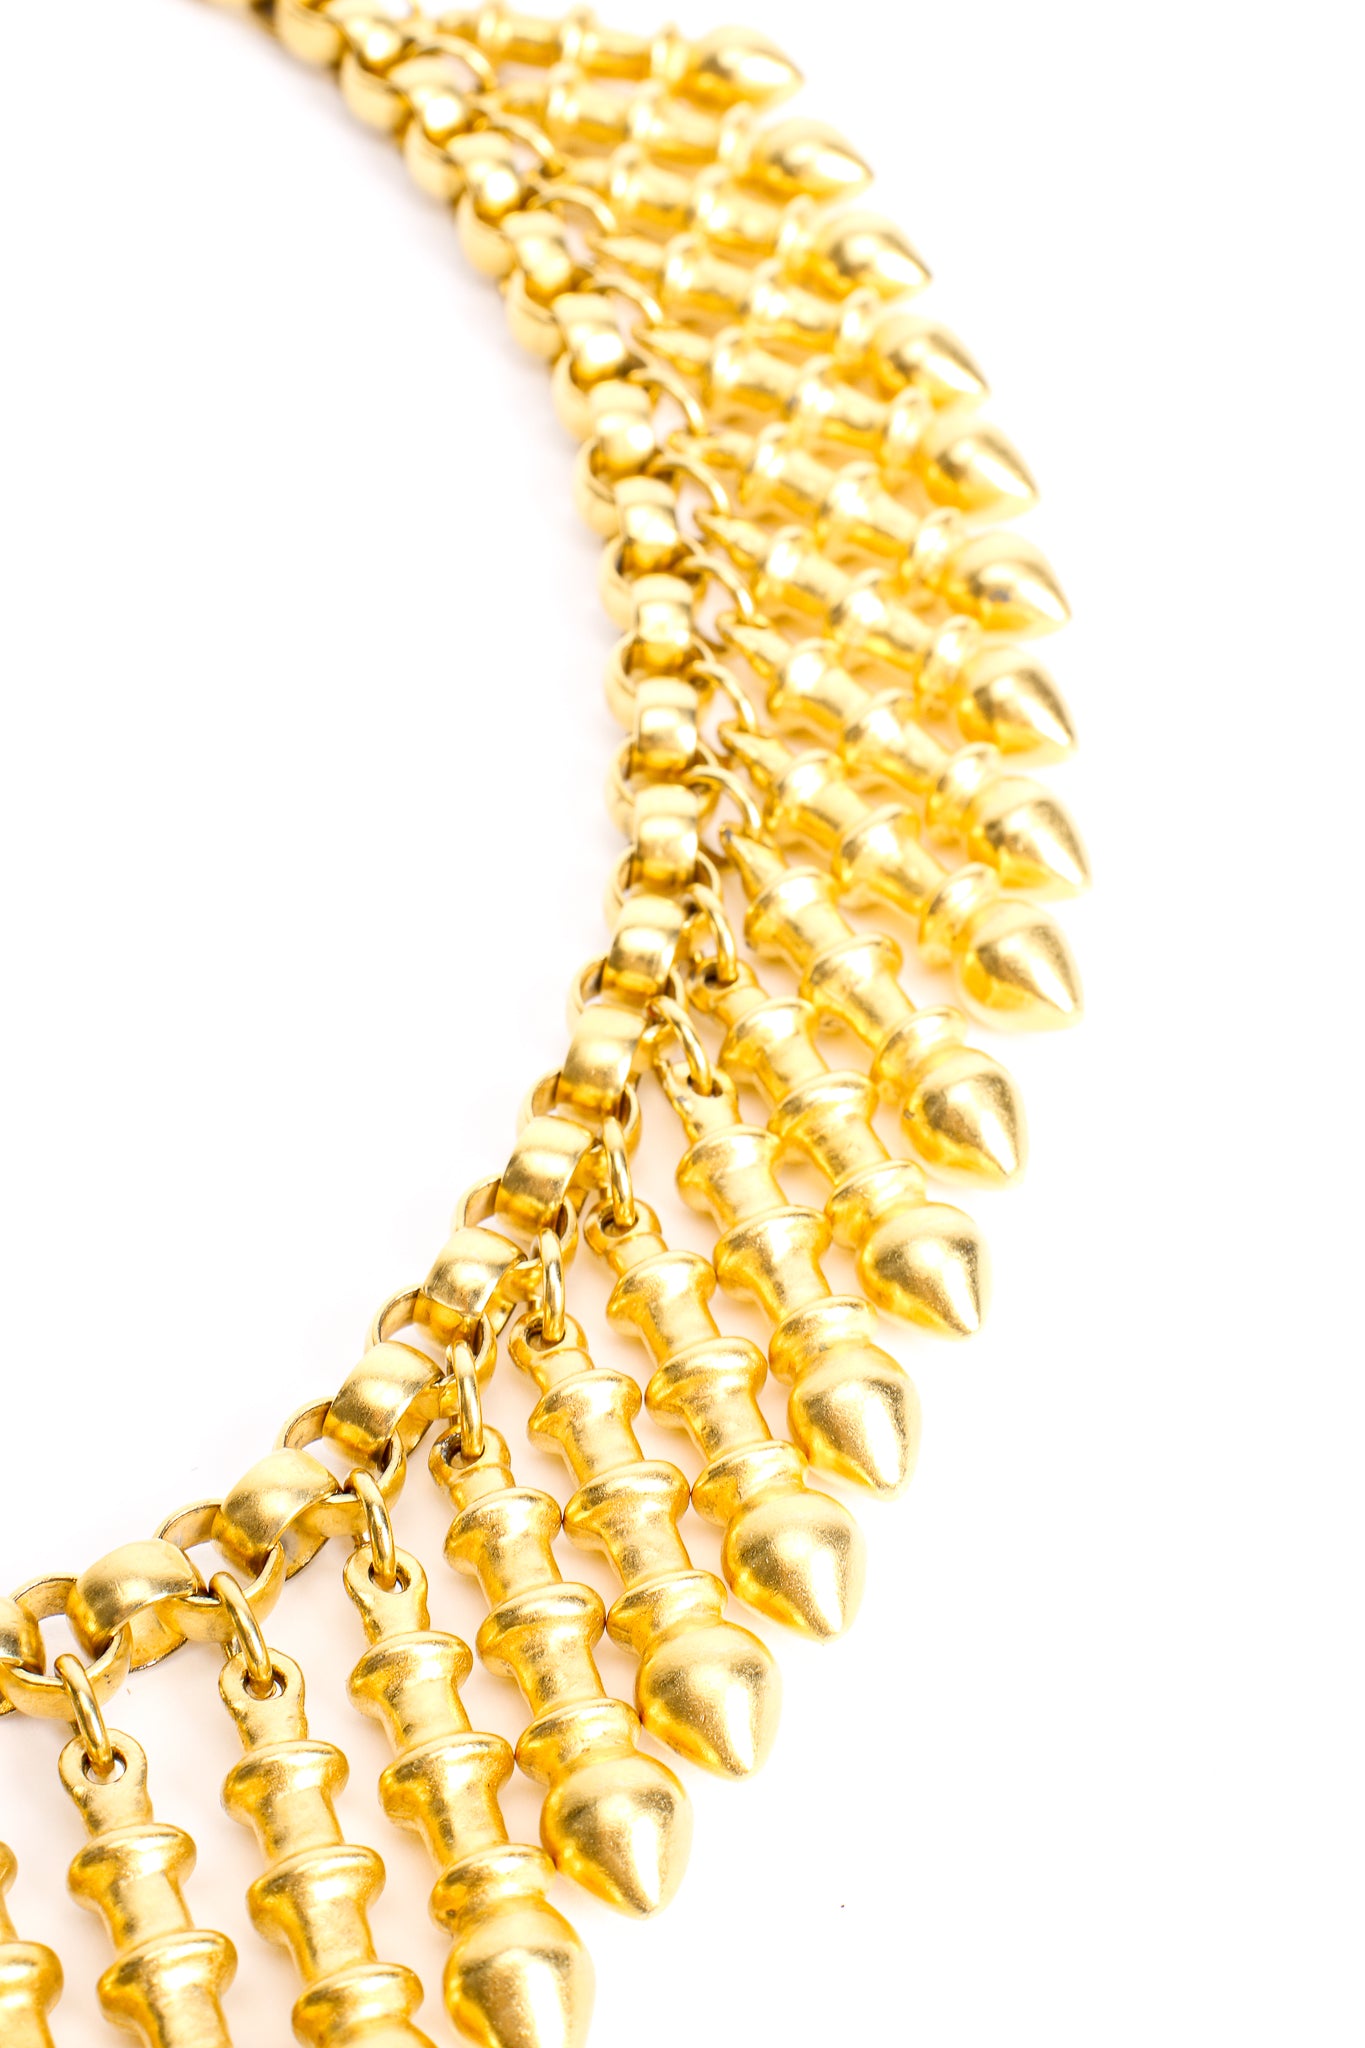 Vintage Matte Gold Waterfall Spike Collar Necklace at Recess Los Angeles